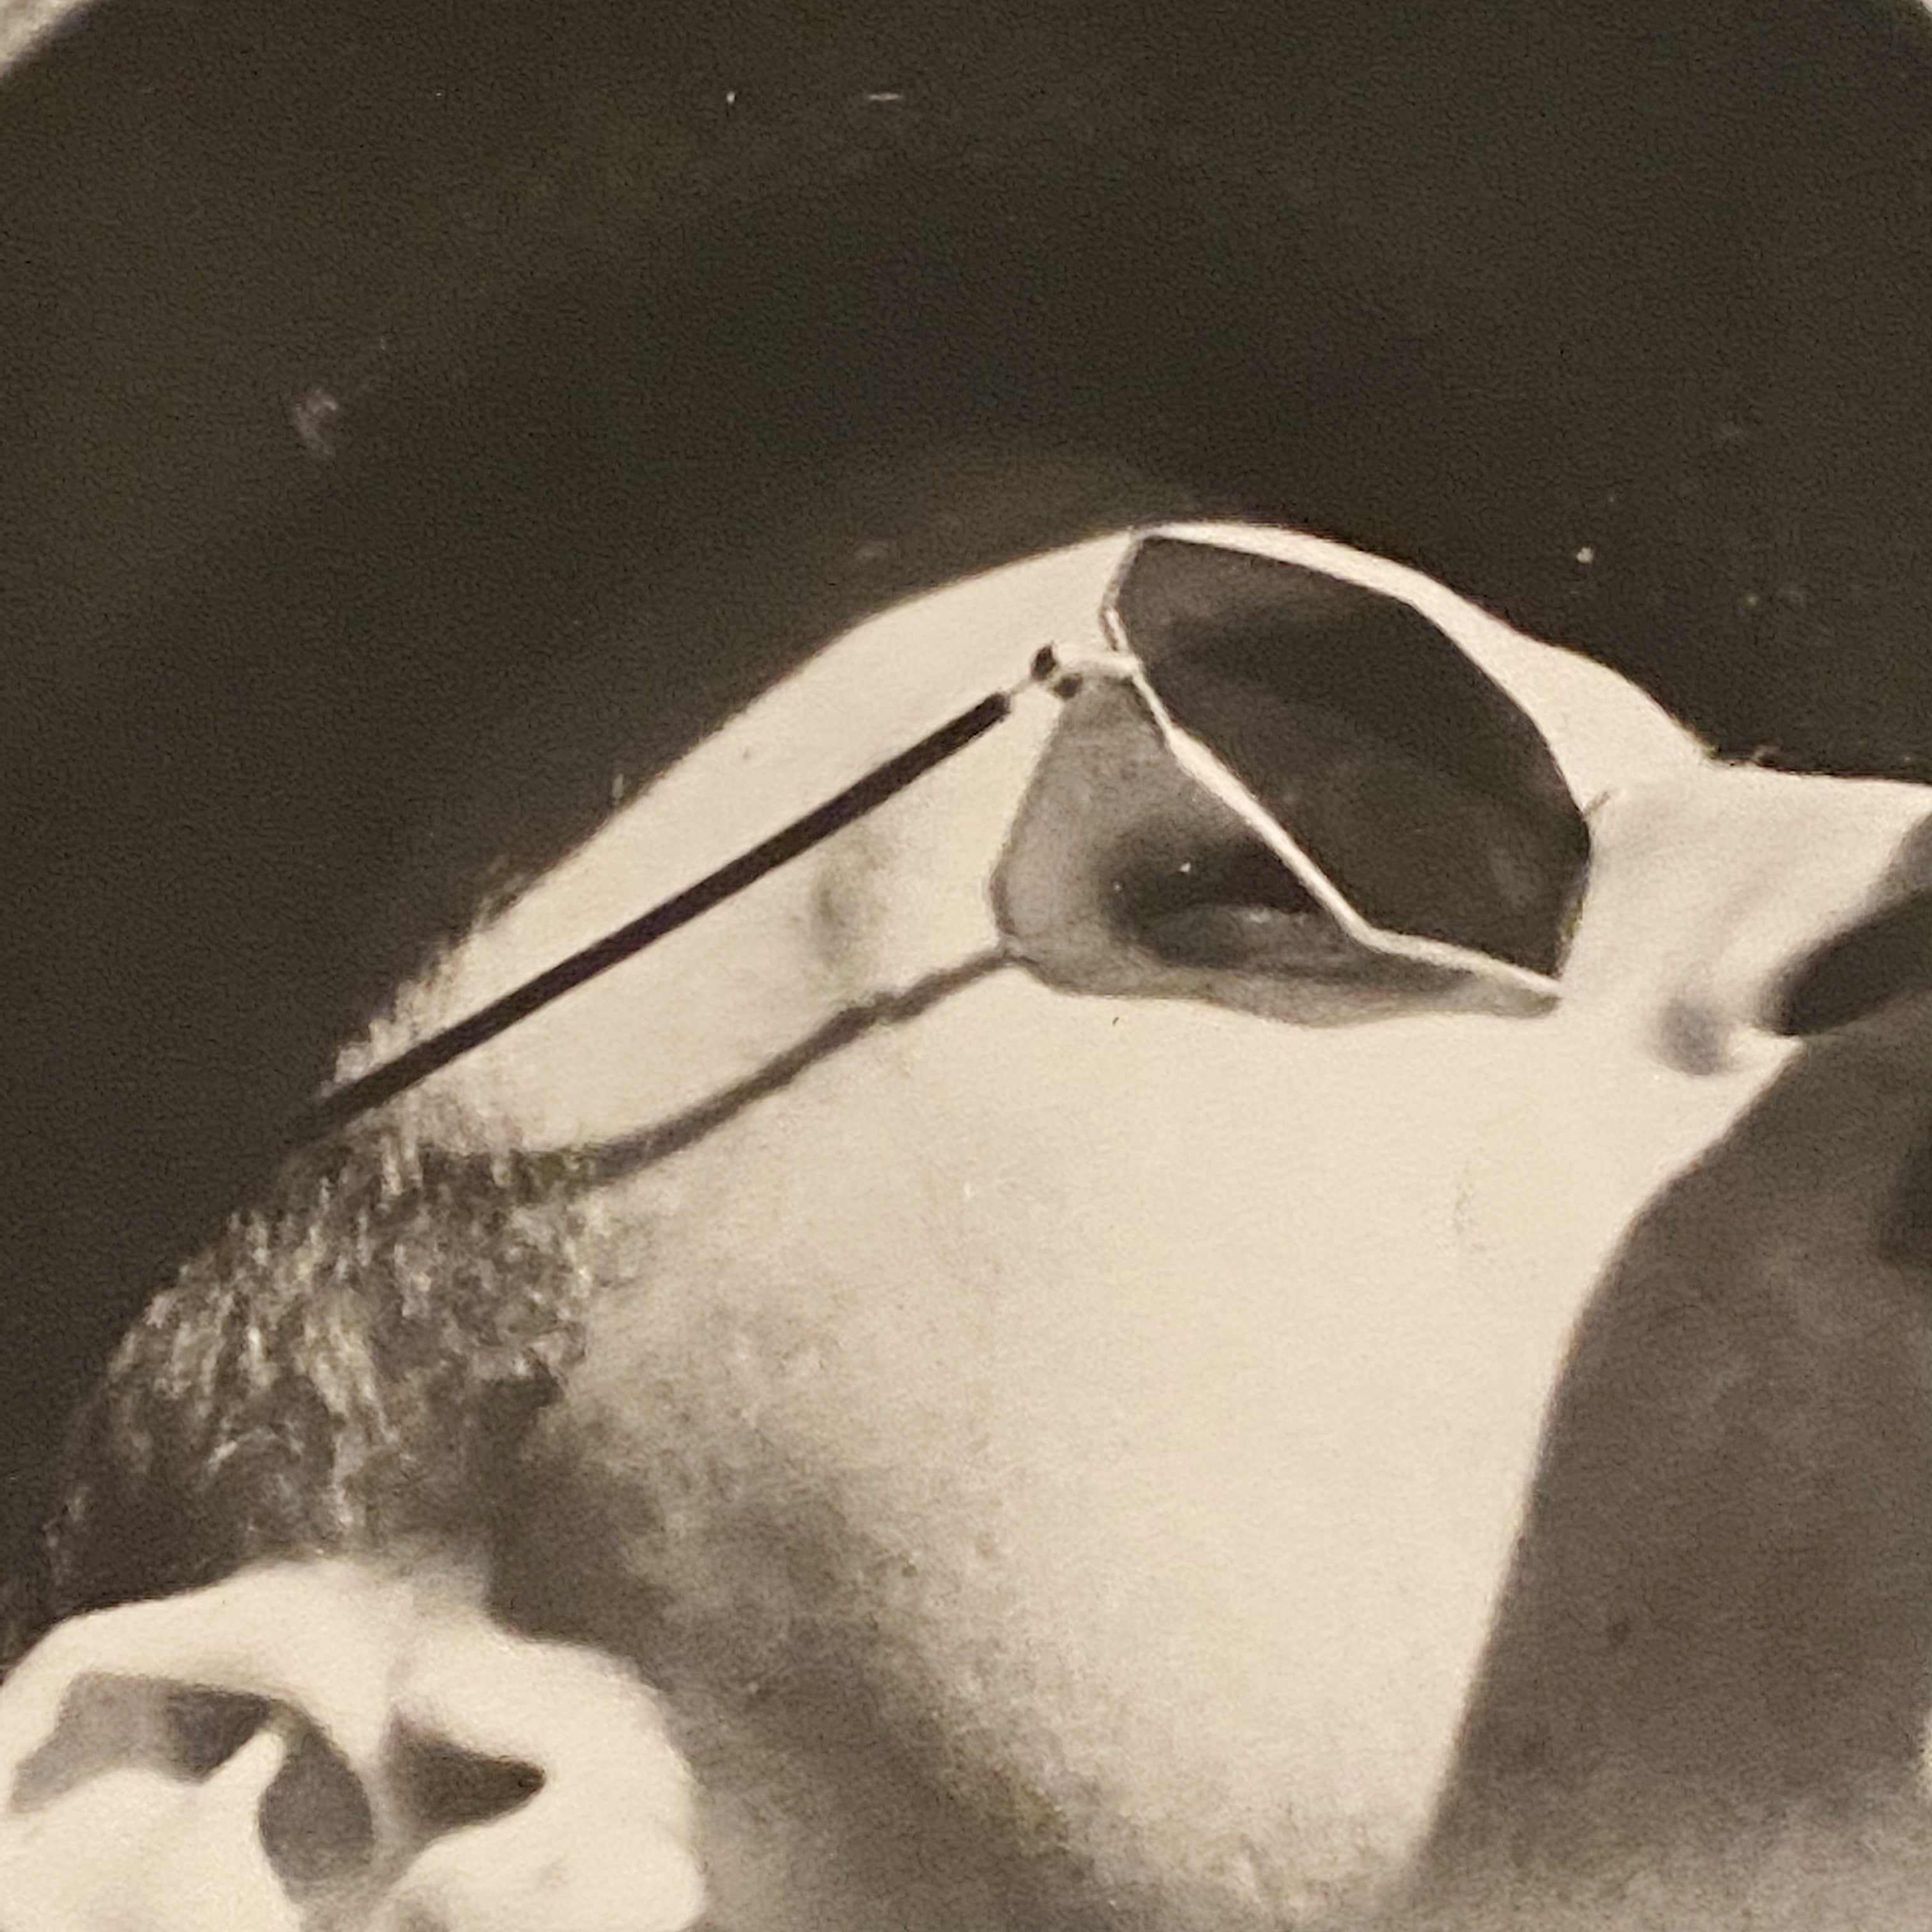 1930s Steampunk Photograph of Man in Sunglasses Drinking Soda